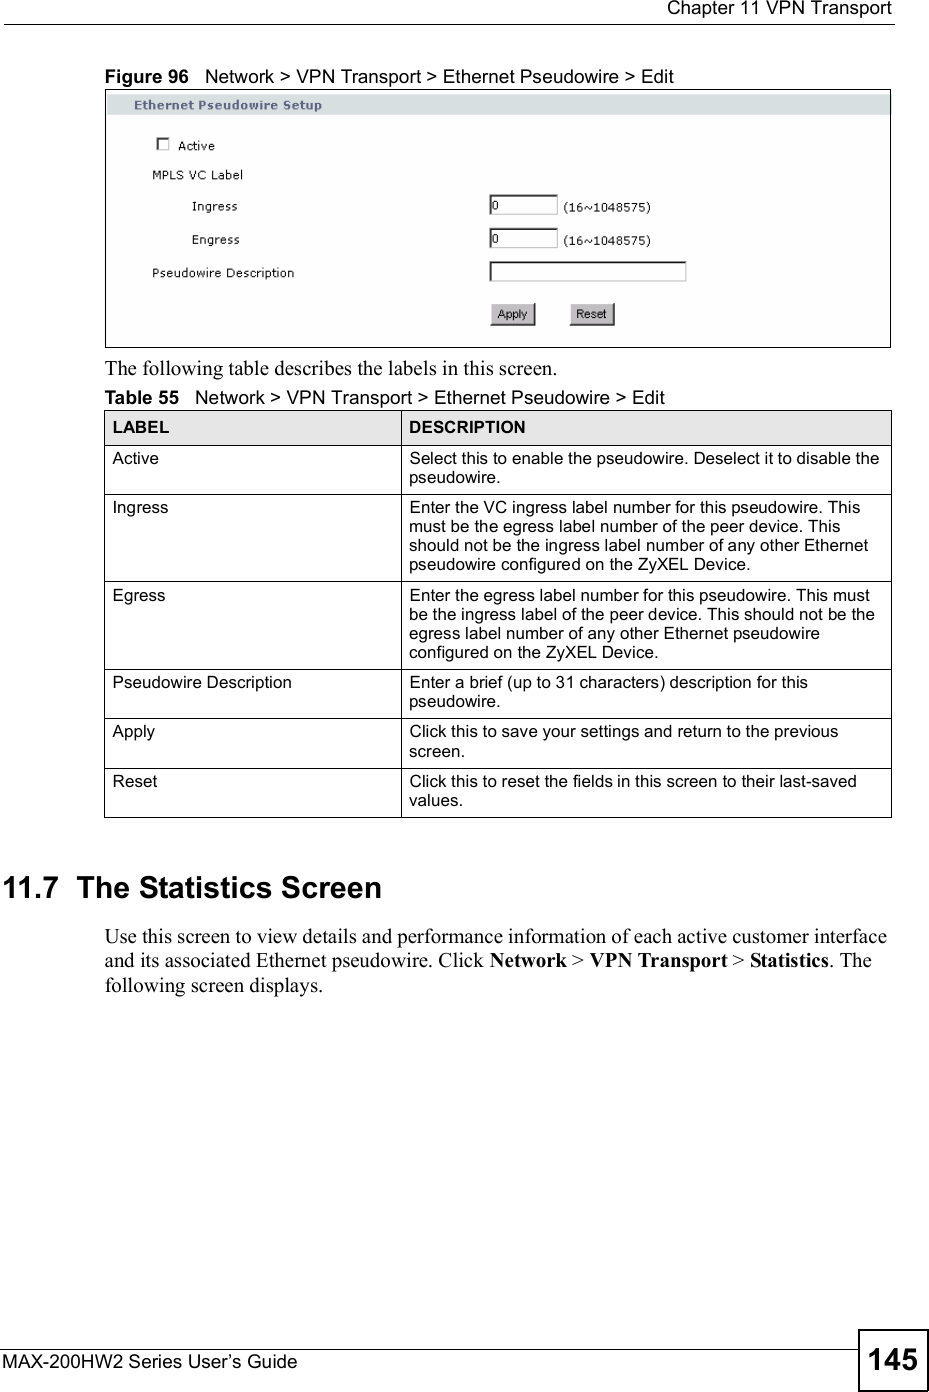  Chapter 11VPN TransportMAX-200HW2 Series User s Guide 145Figure 96   Network &gt; VPN Transport &gt; Ethernet Pseudowire &gt; EditThe following table describes the labels in this screen.11.7  The Statistics ScreenUse this screen to view details and performance information of each active customer interface and its associated Ethernet pseudowire. Click Network &gt; VPN Transport &gt; Statistics. The following screen displays.Table 55   Network &gt; VPN Transport &gt; Ethernet Pseudowire &gt; EditLABEL DESCRIPTIONActiveSelect this to enable the pseudowire. Deselect it to disable the pseudowire.IngressEnter the VC ingress label number for this pseudowire. This must be the egress label number of the peer device. This should not be the ingress label number of any other Ethernet pseudowire configured on the ZyXEL Device.EgressEnter the egress label number for this pseudowire. This must be the ingress label of the peer device. This should not be the egress label number of any other Ethernet pseudowire configured on the ZyXEL Device.Pseudowire DescriptionEnter a brief (up to 31 characters) description for this pseudowire.ApplyClick this to save your settings and return to the previous screen.ResetClick this to reset the fields in this screen to their last-saved values.